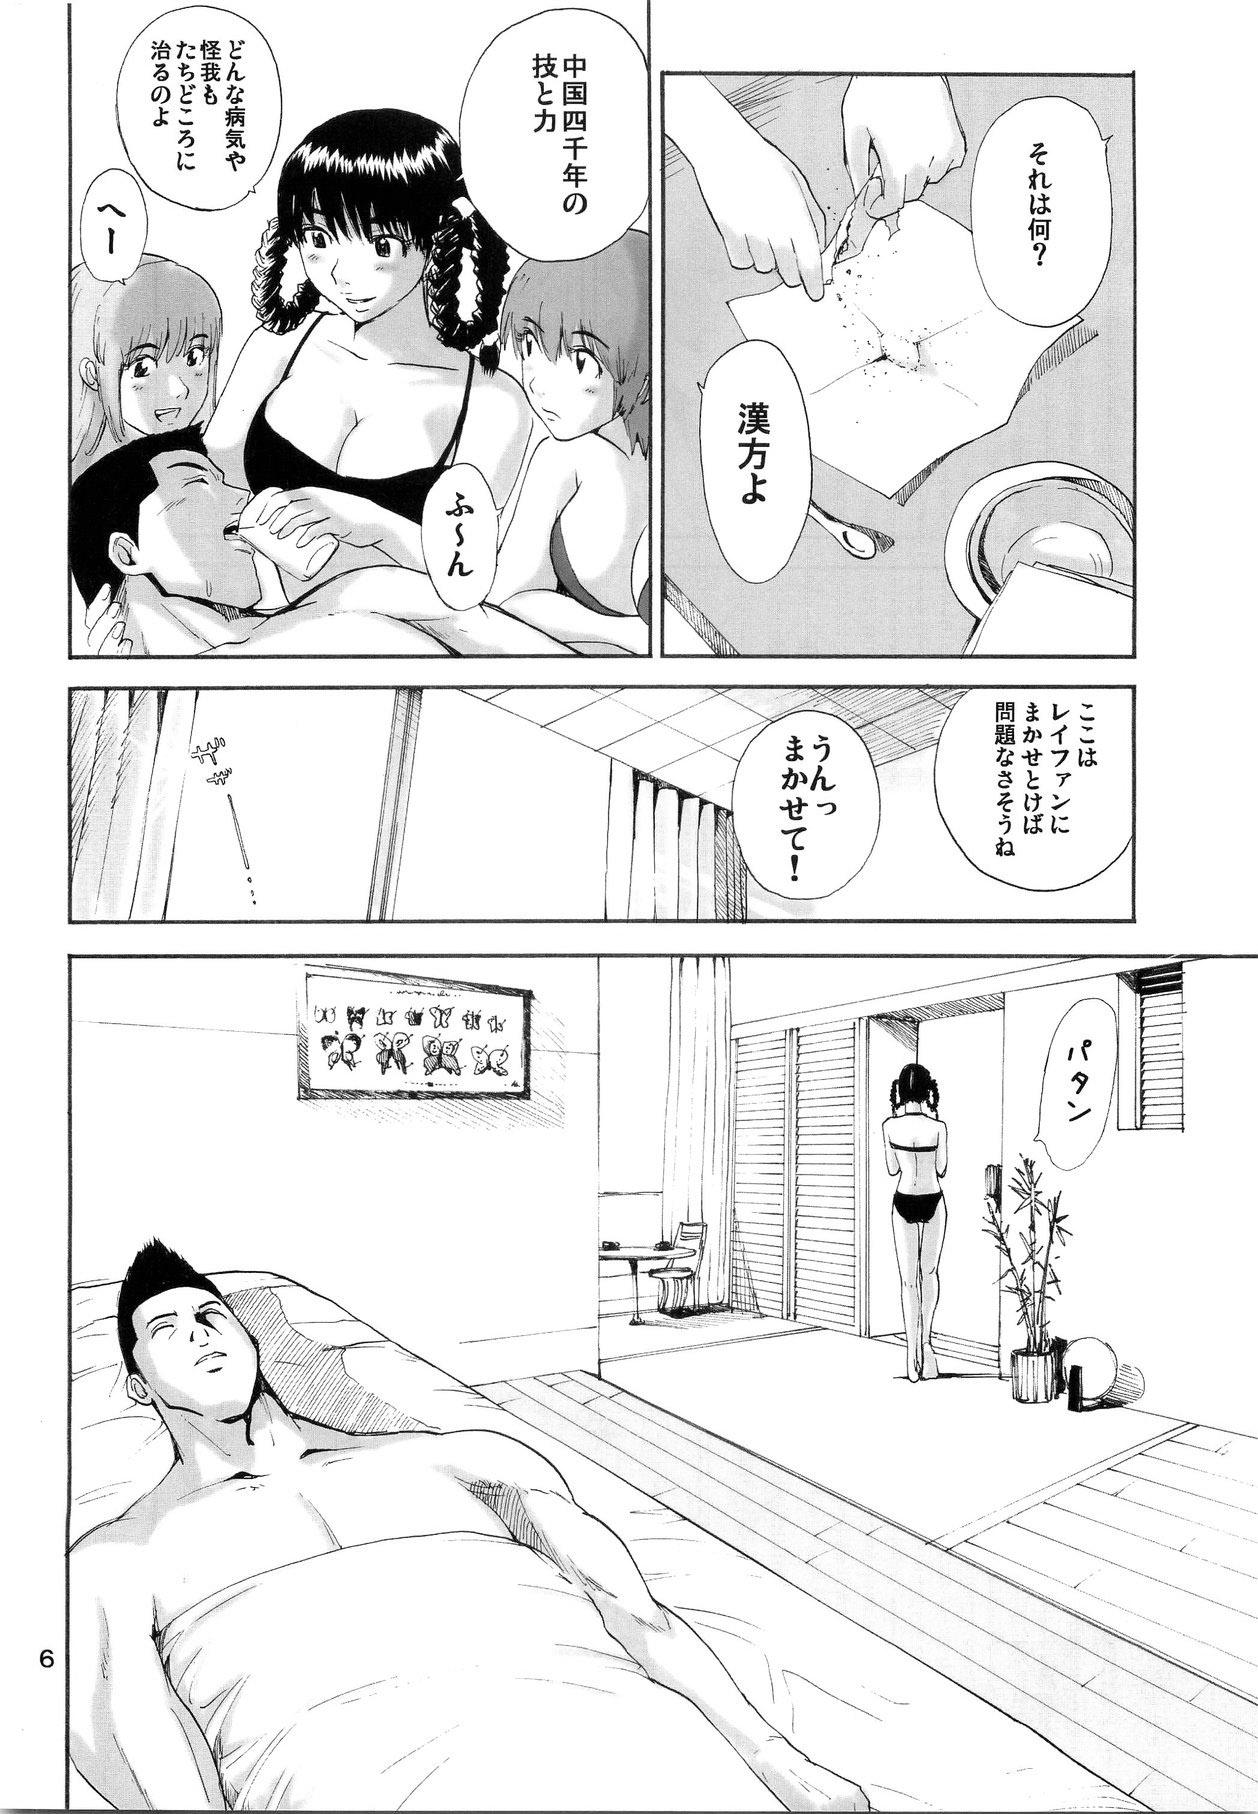 Sister What Happened to You? - Dead or alive Breast - Page 7